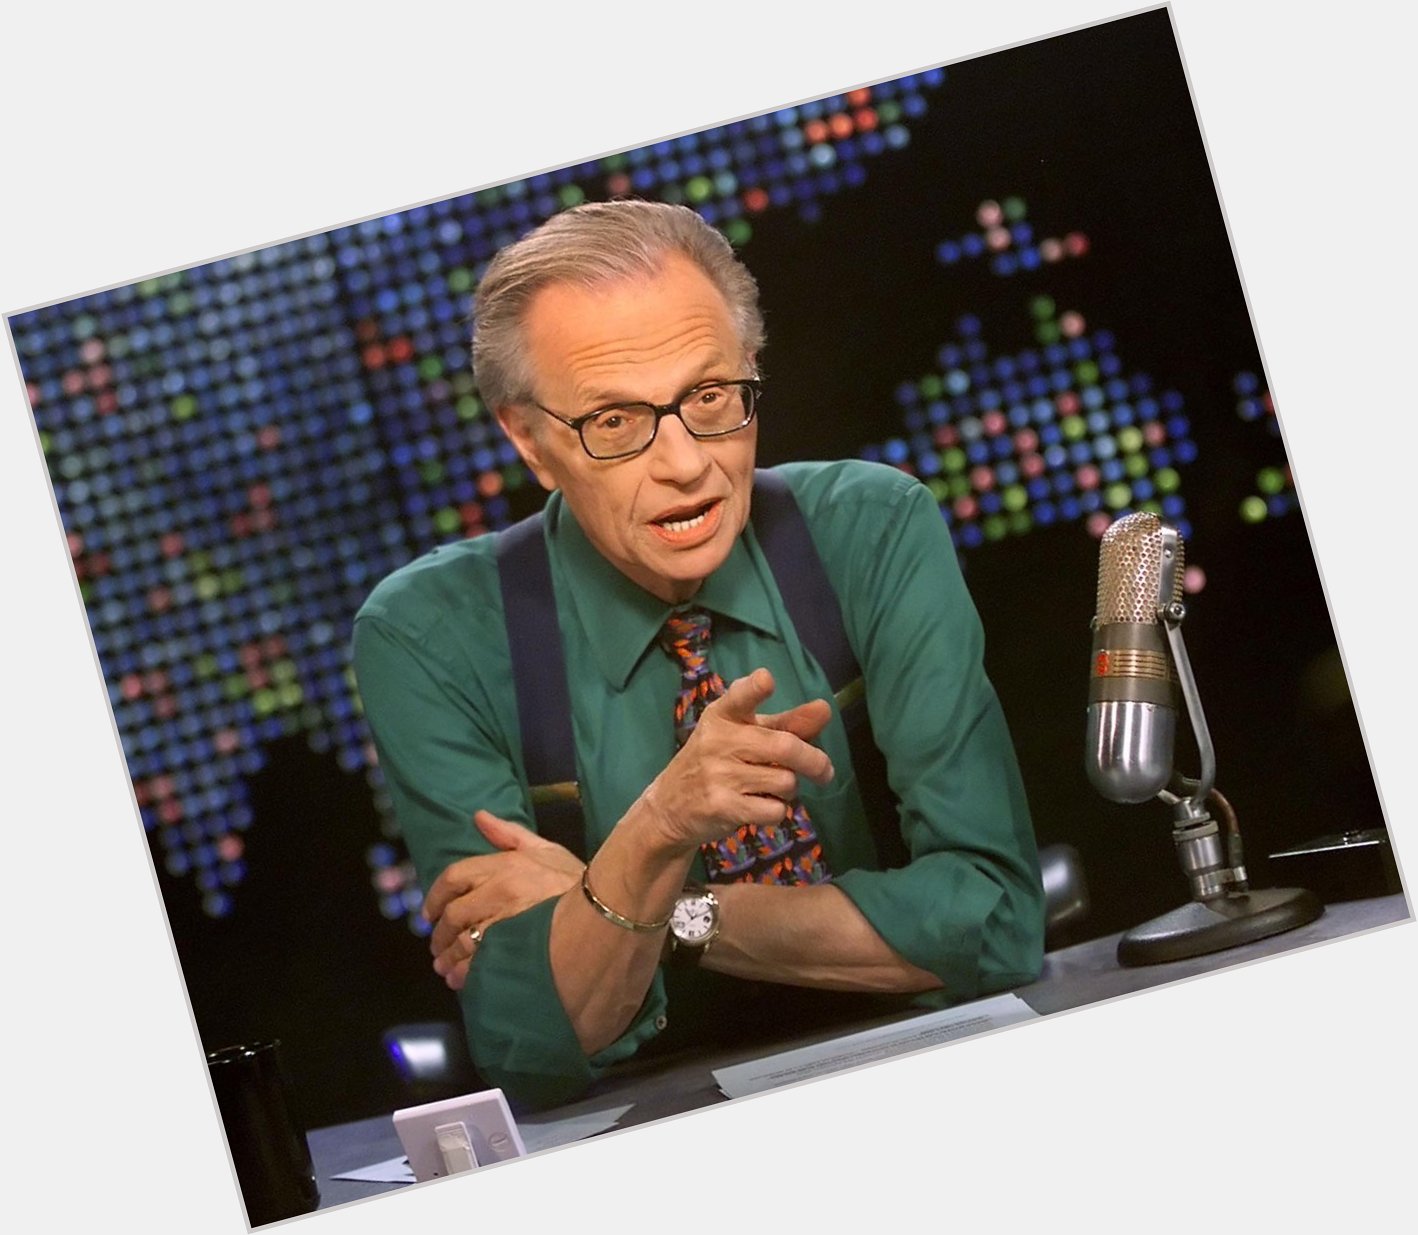 Happy Birthday to Larry King who turns 84 today! 